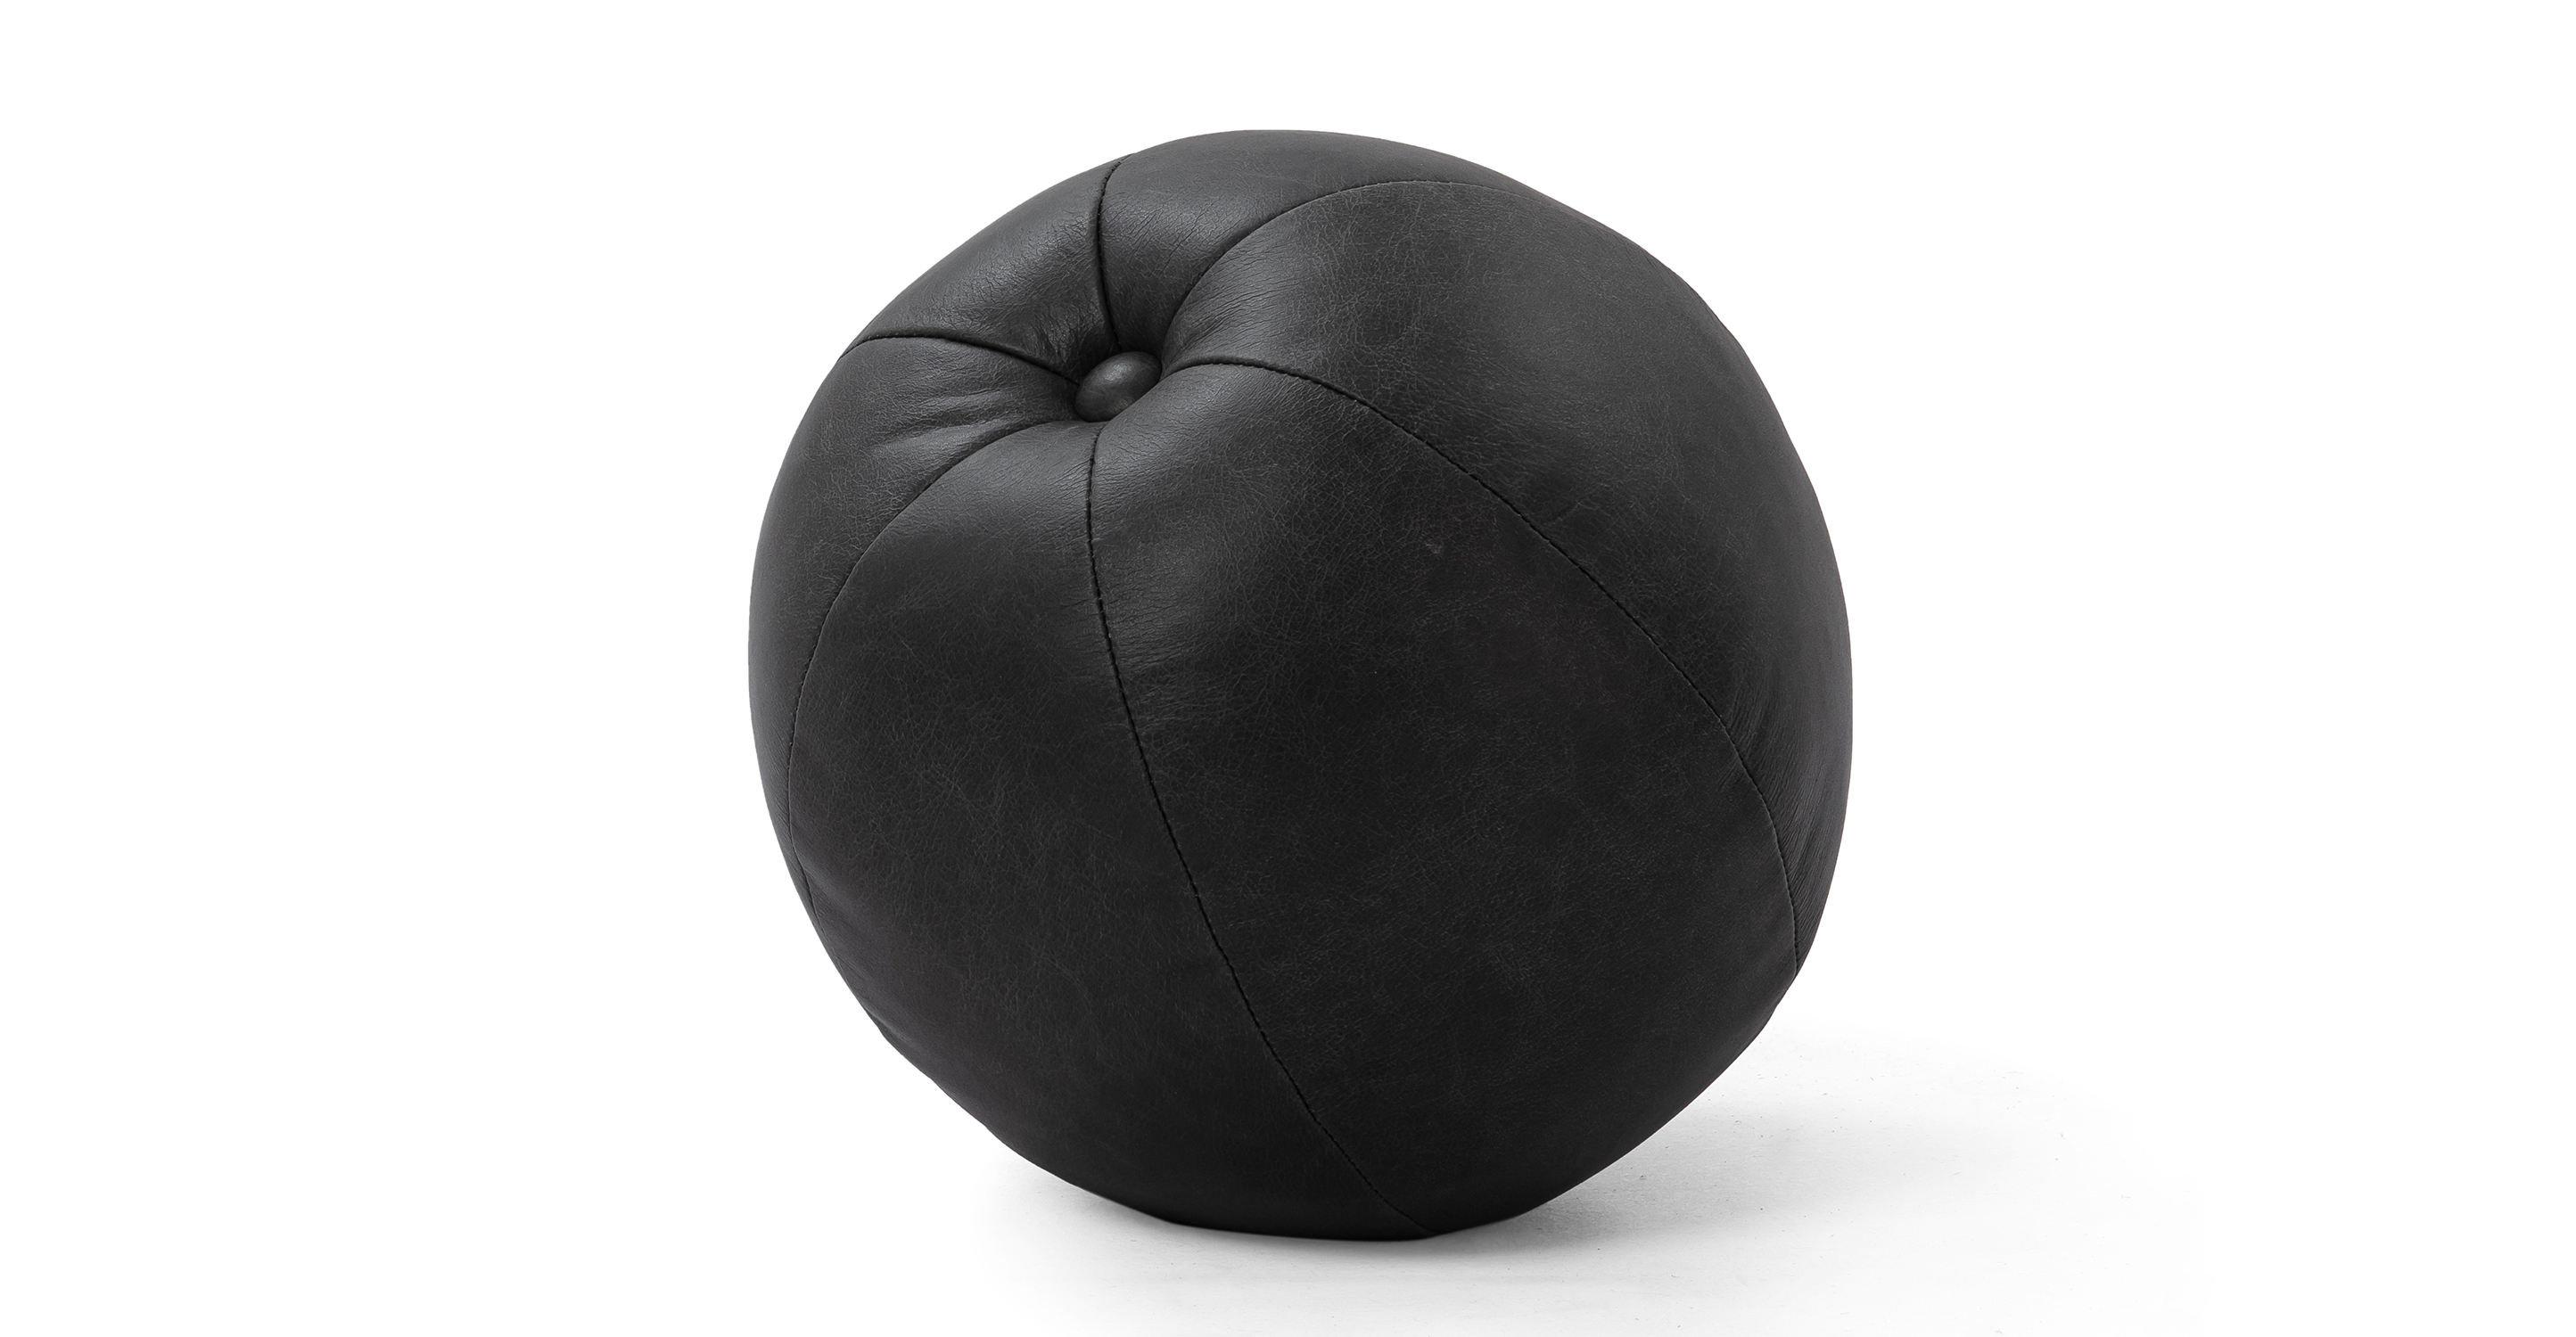 Image shows one large (12" diameter) Mid-Century Orb soft throw pillow in Ebony Black Leather. One tufted button at the top of the pillow, with Kardiel tag on the side. 